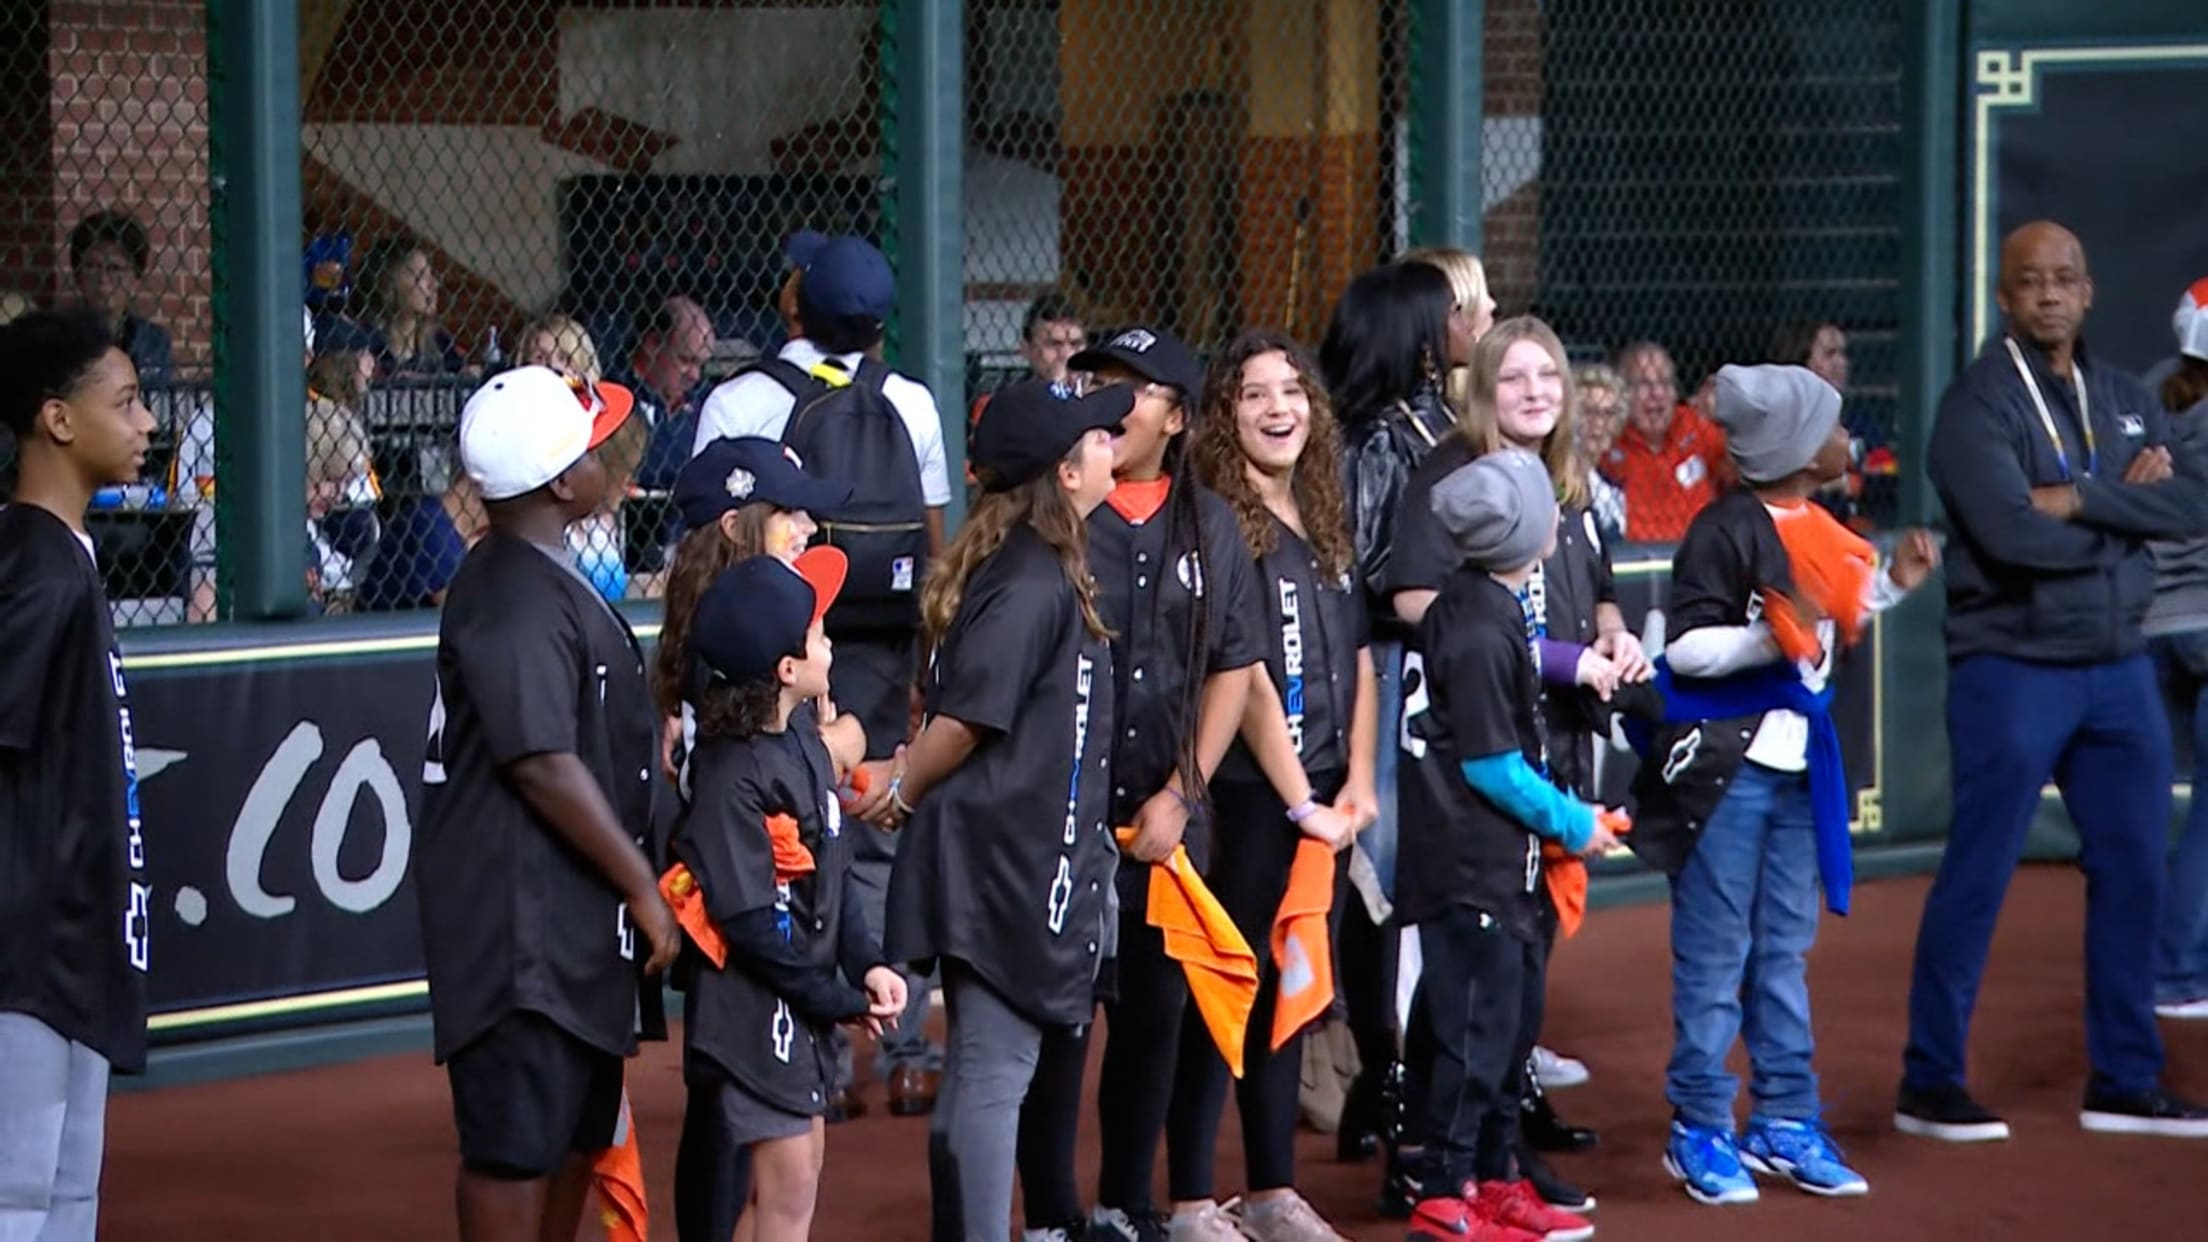 Astros players visit youth academy, participate in drills - ABC13 Houston